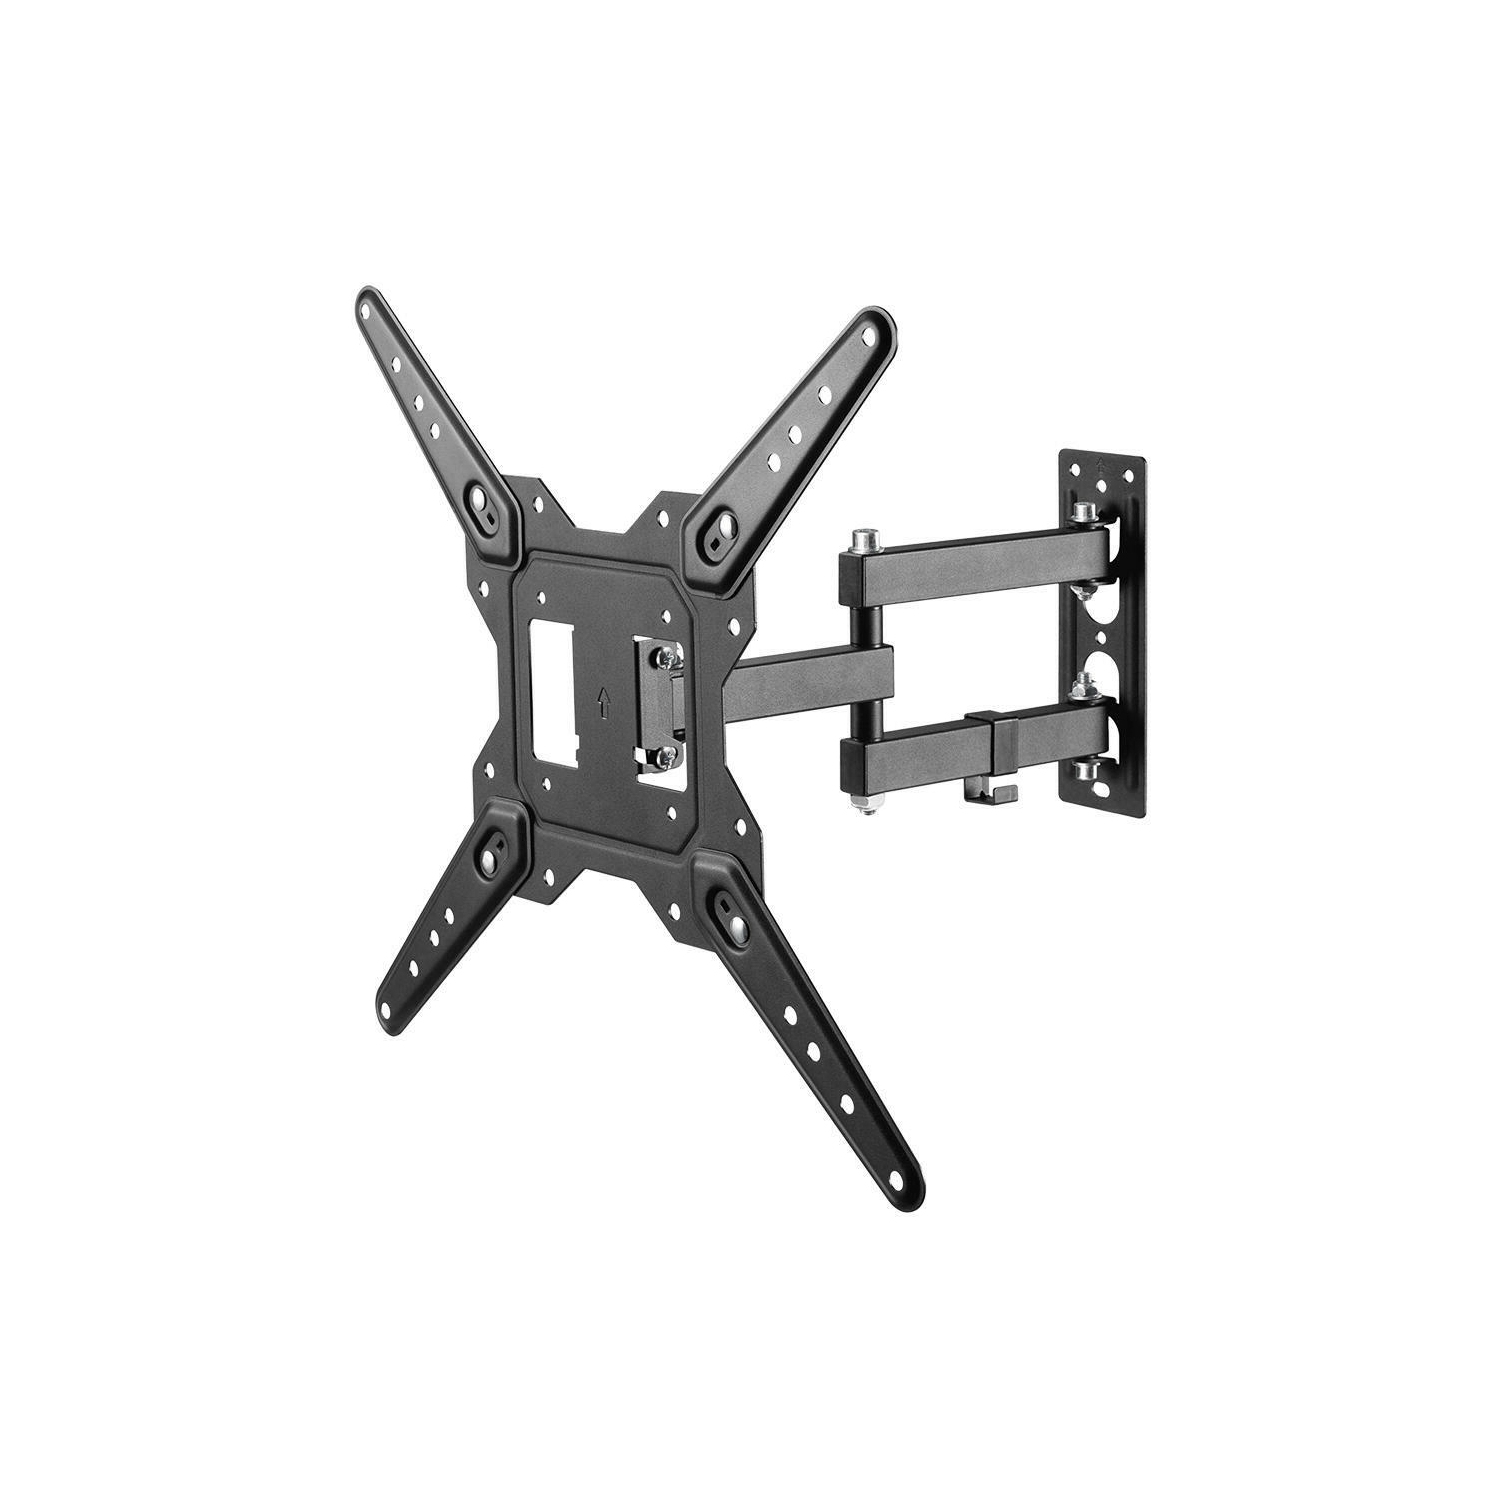 23-55 inches For Full Motion TV Wall Mount Monitor Wall Bracket TV Mounts for Screen,400x400mm - PrimeCables